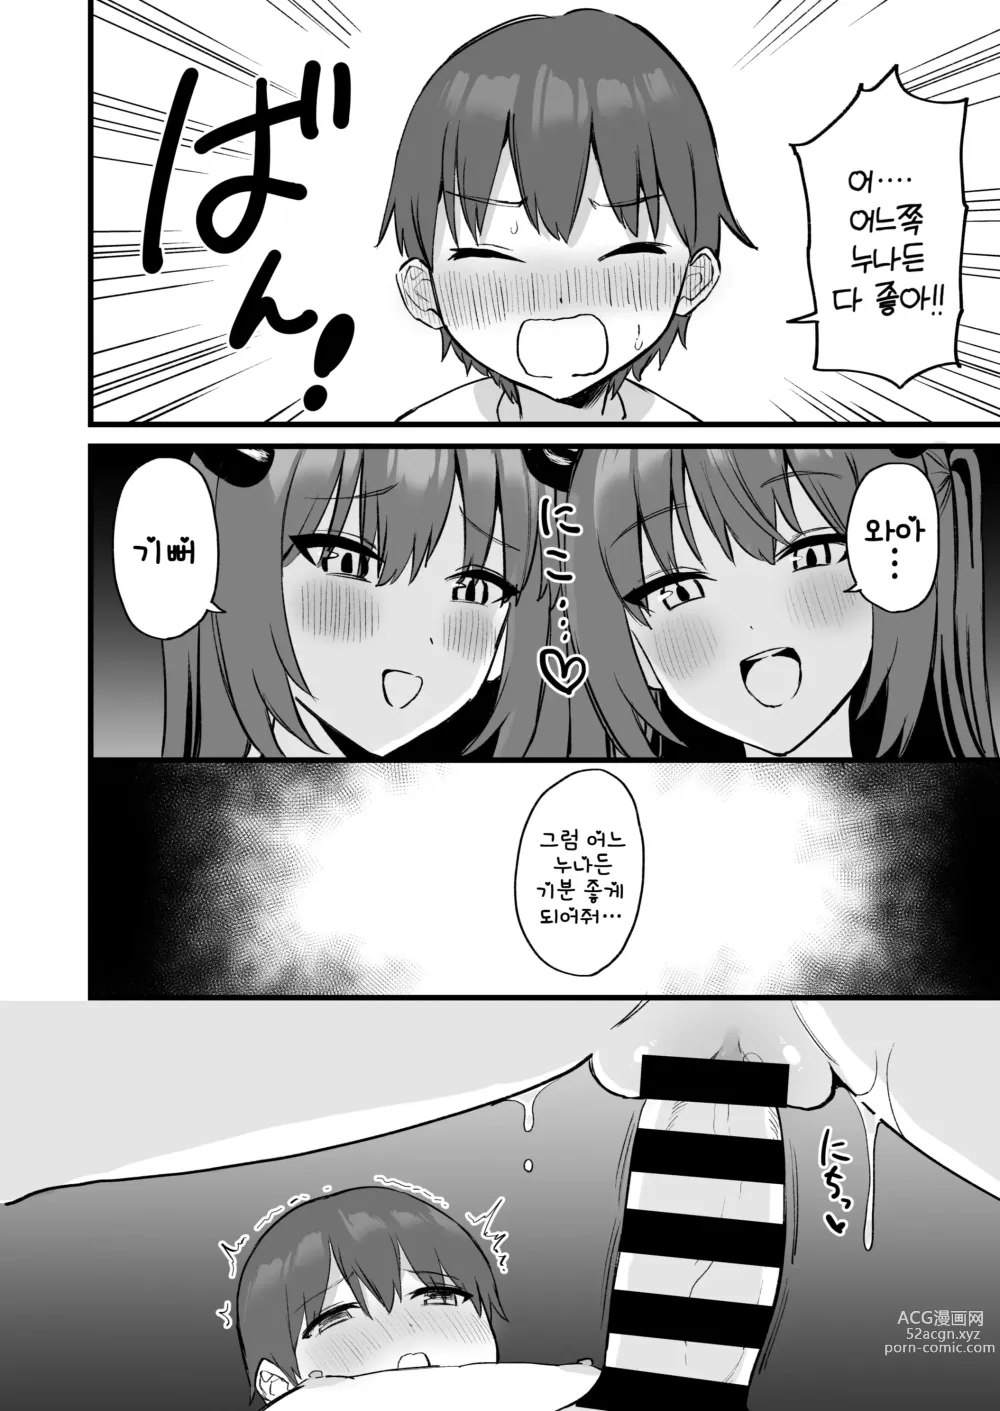 Page 48 of doujinshi 누나는 서큐버스!?